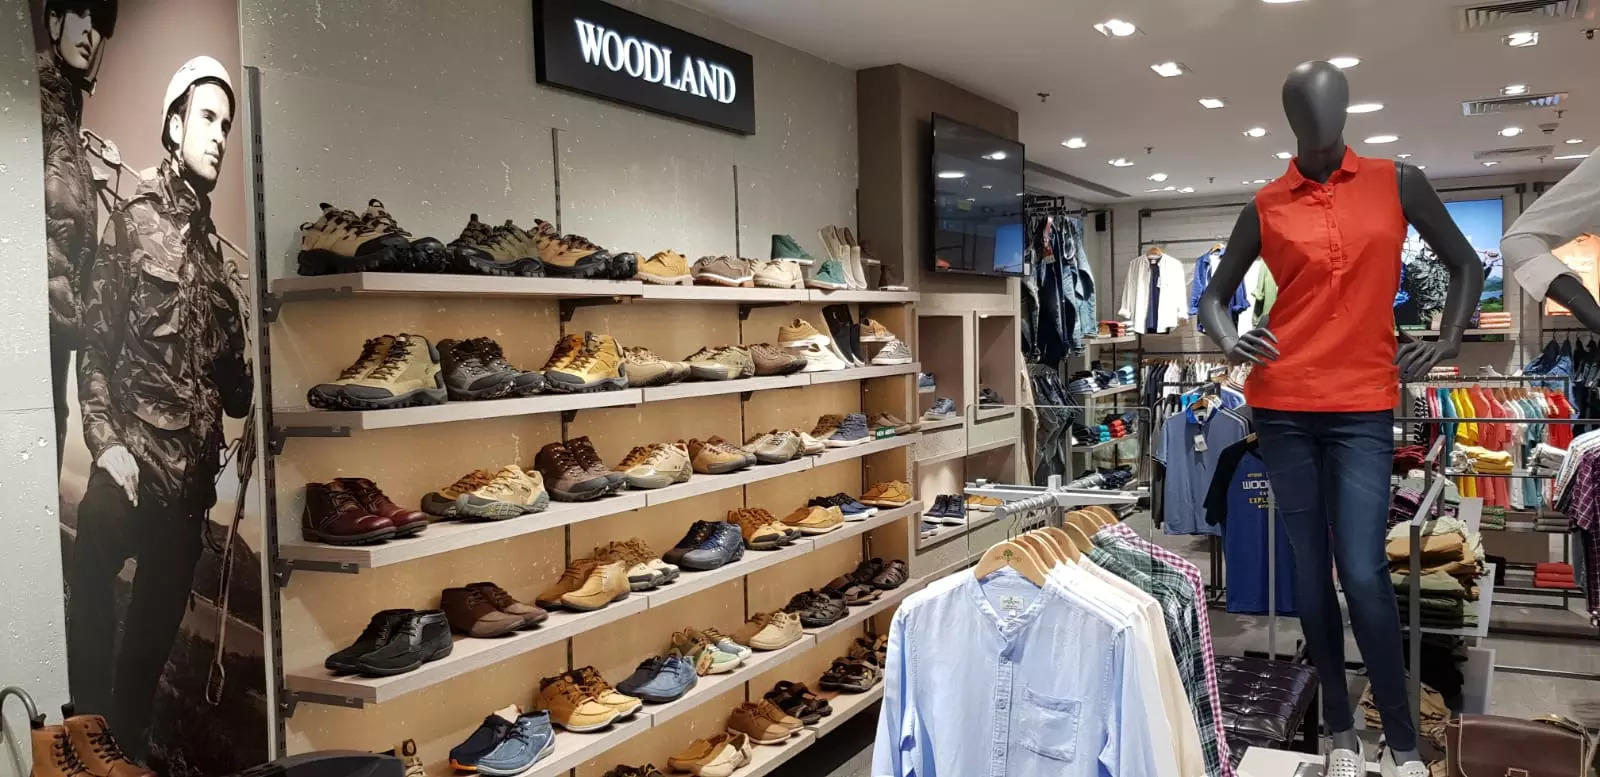 Woodland eyeing pre-pandemic revenue in FY 2023, plans to open 25-30 new retail stores